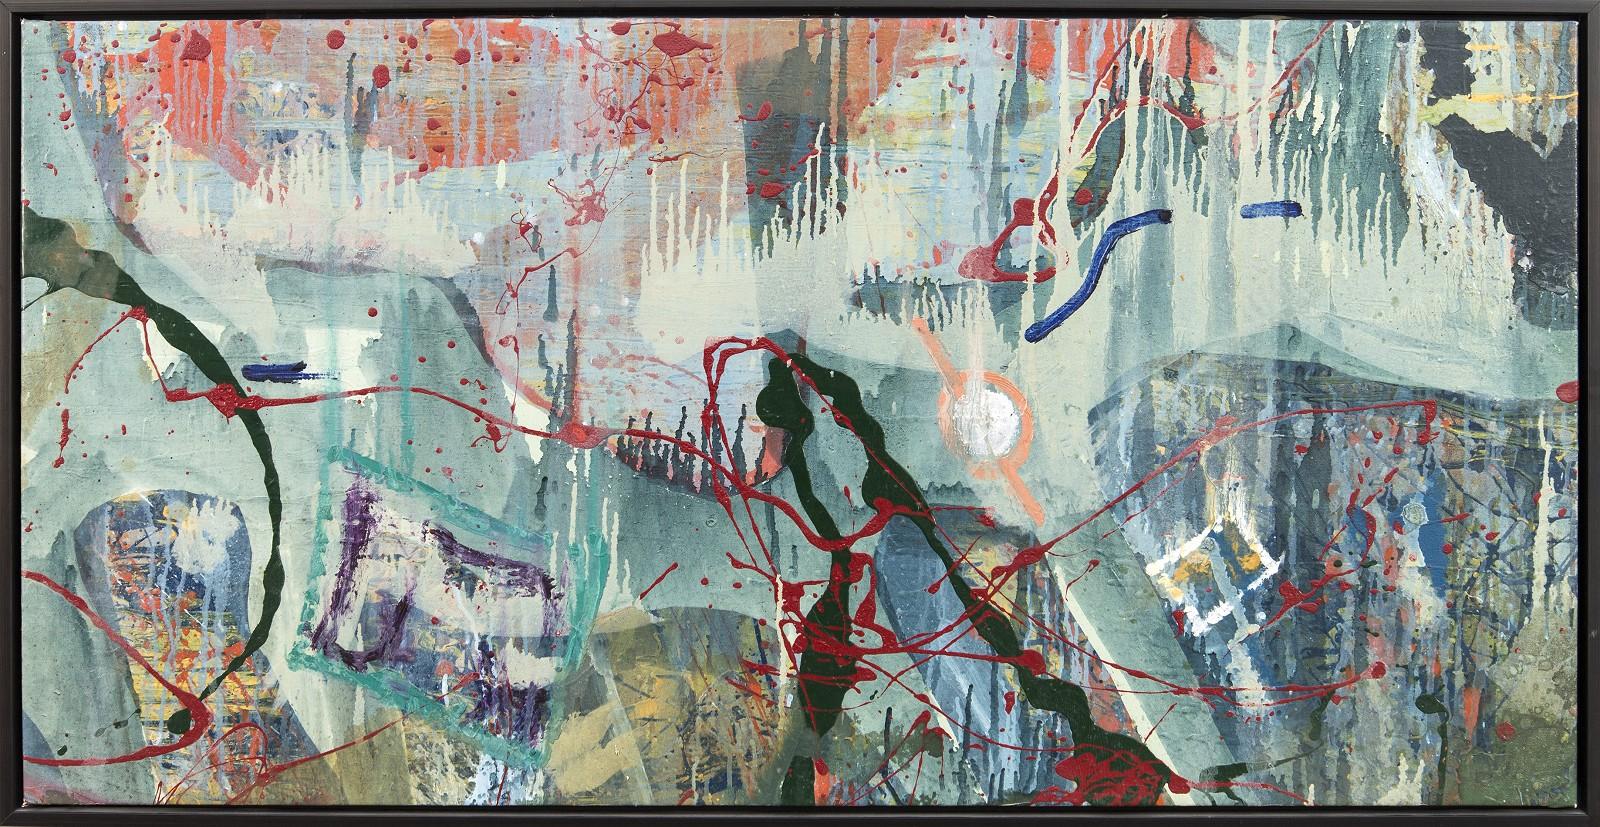 Rain Dance No 1 - large, muted, gestural abstract landscape, acrylic on canvas